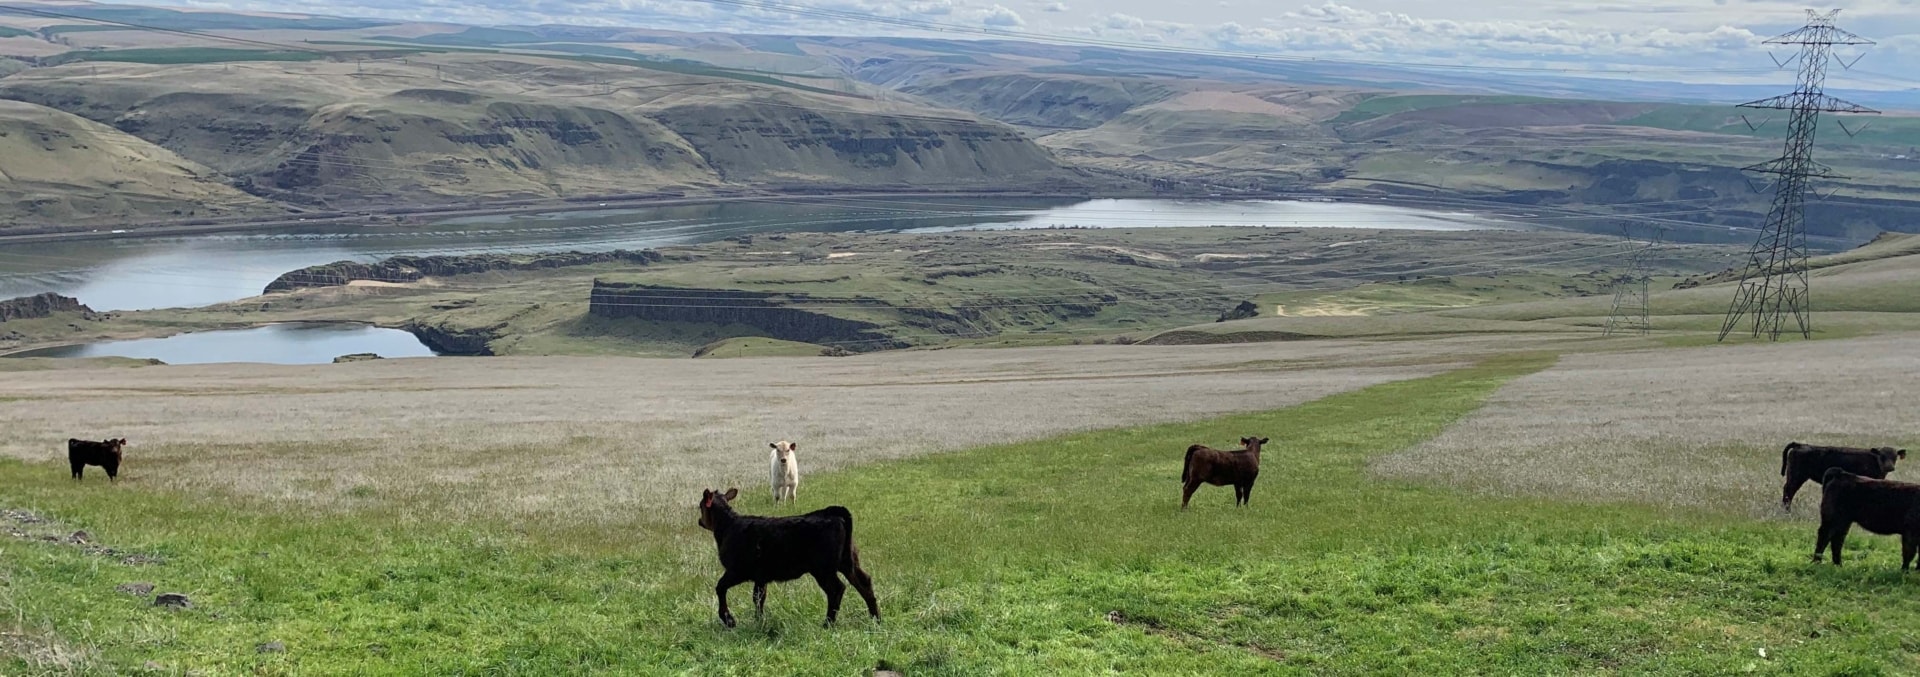 washington cattle ranches for sale columbia gorge river ranch